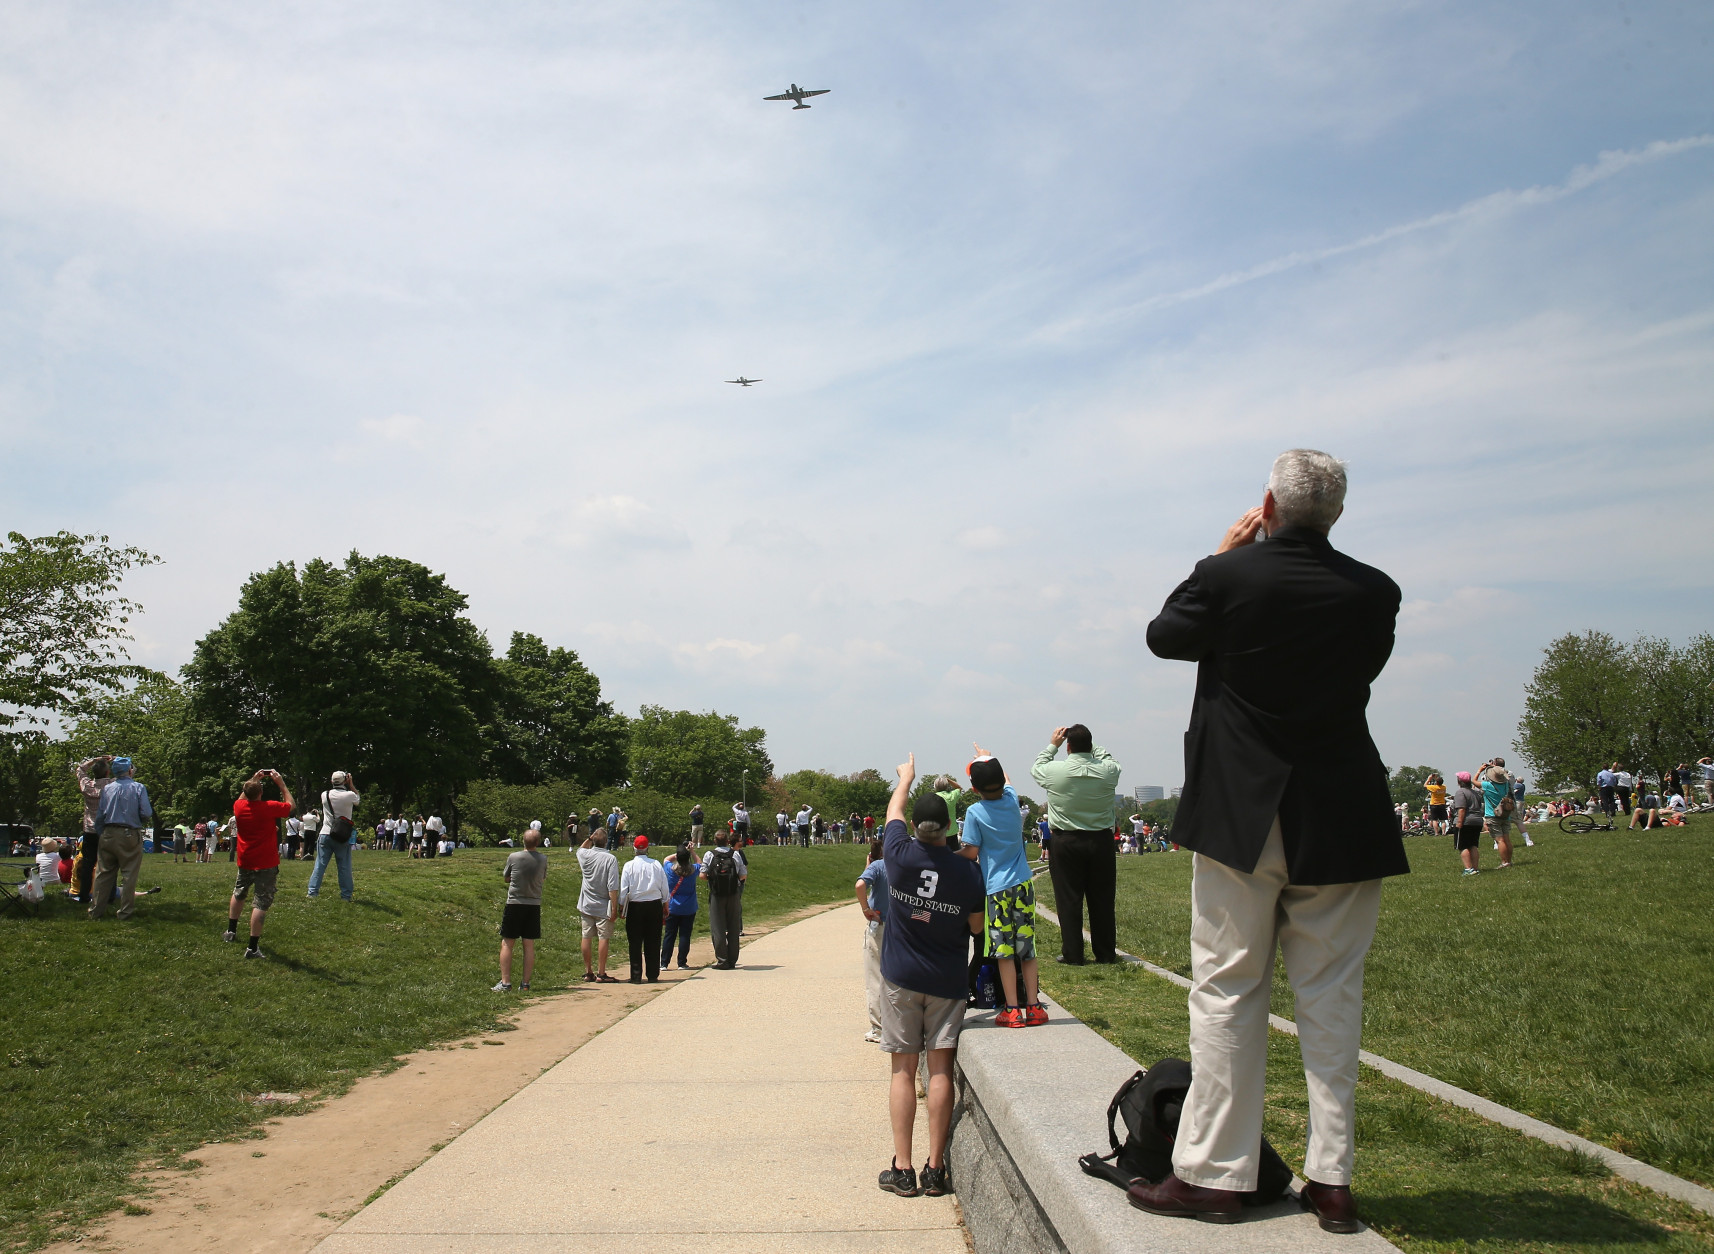 WASHINGTON, DC - MAY 08: People watch as vintage World War II war planes fly down the National Mall May 8, 2015 in Washington, DC. Fifty six vintage war planes took part in a flyover near the WWII memorial for the 70th anniversary Victory in Europe celebration. (Photo by Mark Wilson/Getty Images)